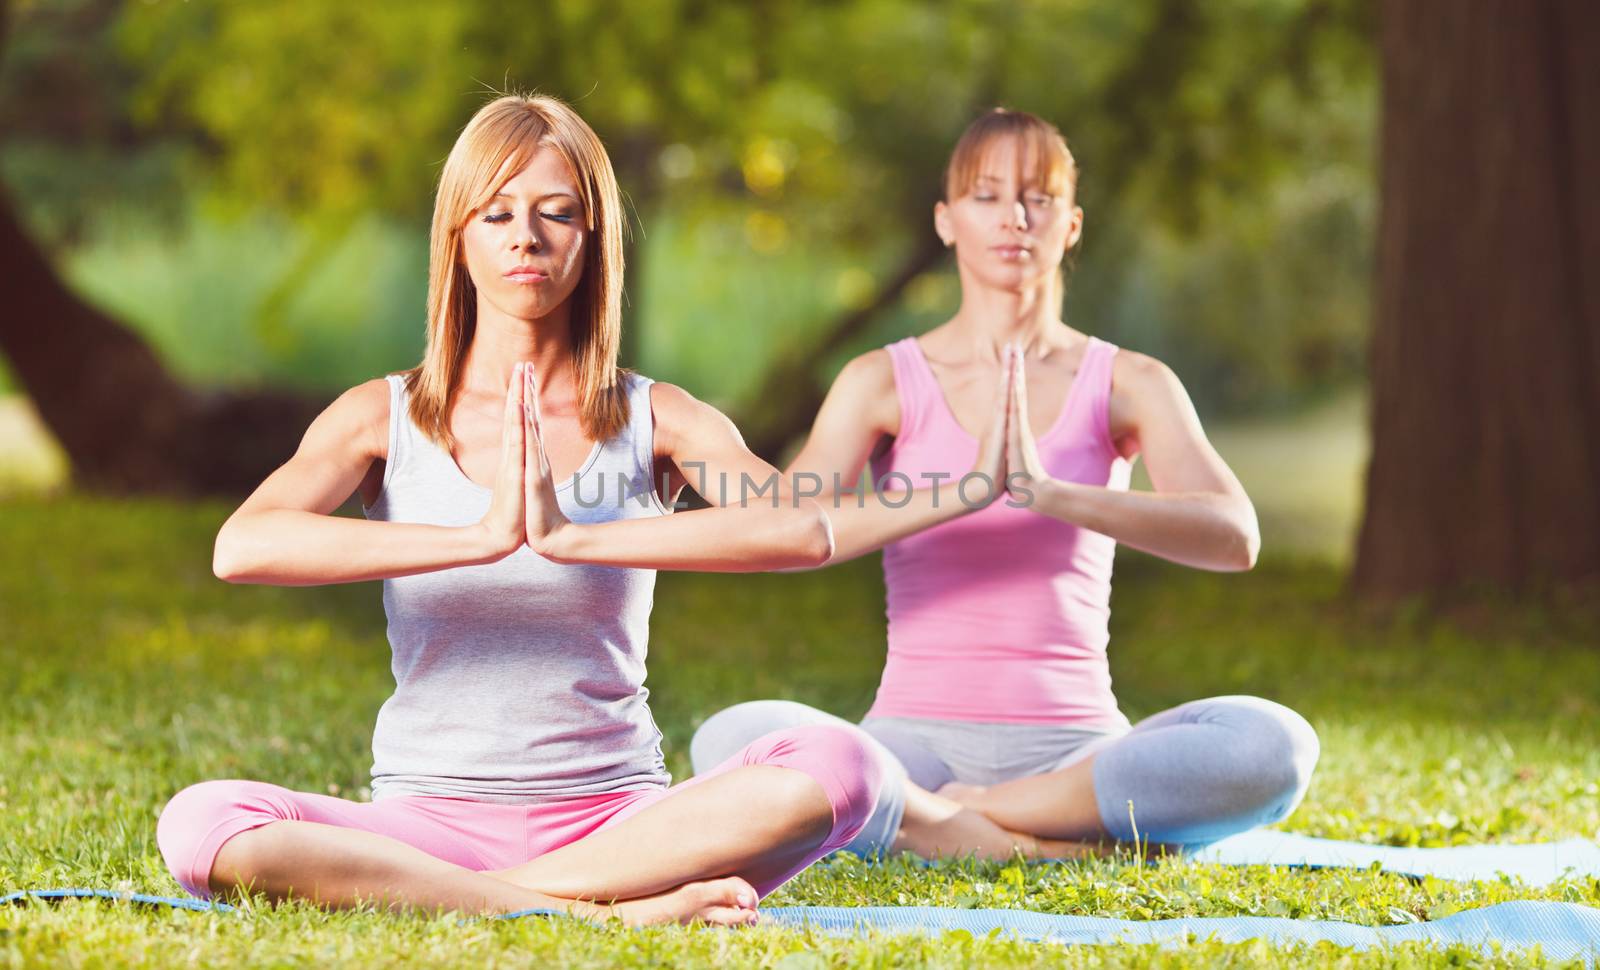 Two beautiful women meditating in the park